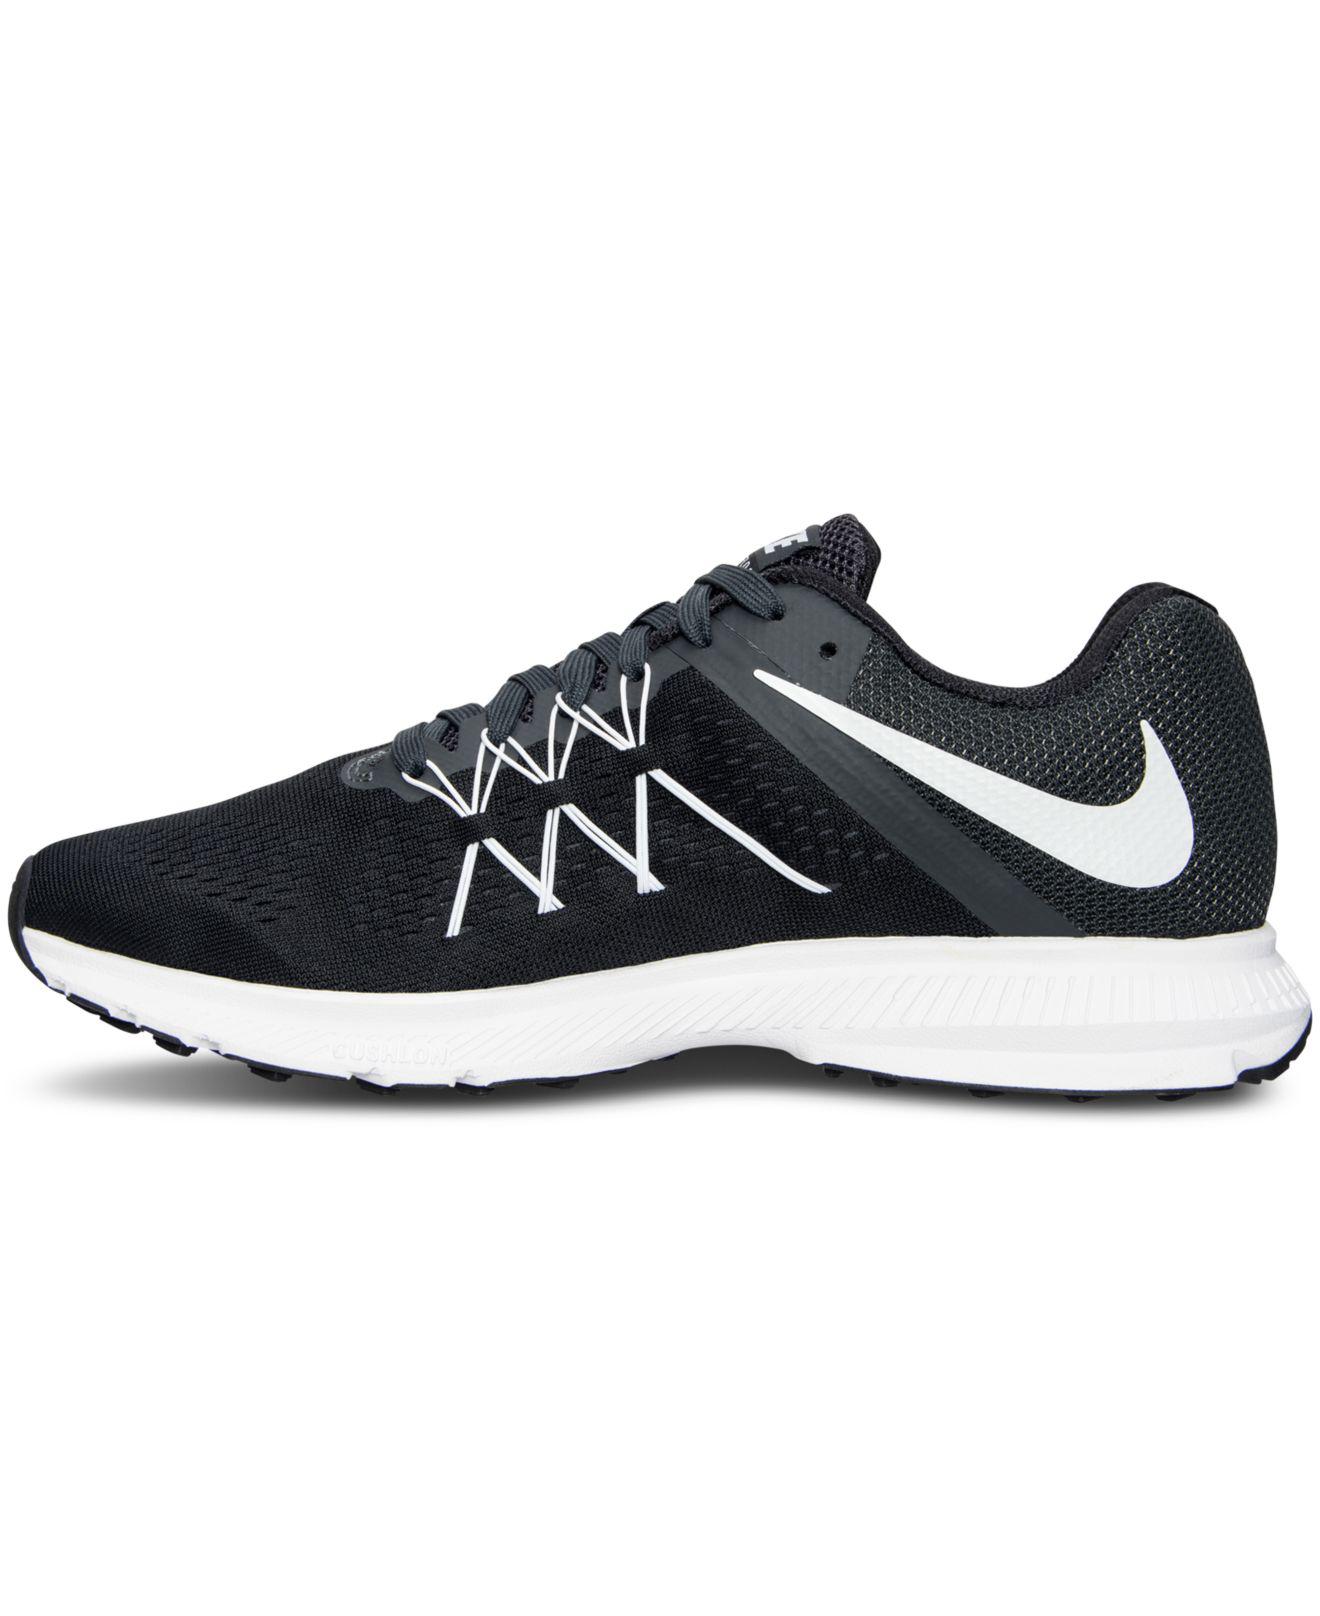 Lyst - Nike Men's Air Zoom Winflo 3 Running Sneakers From Finish Line ...